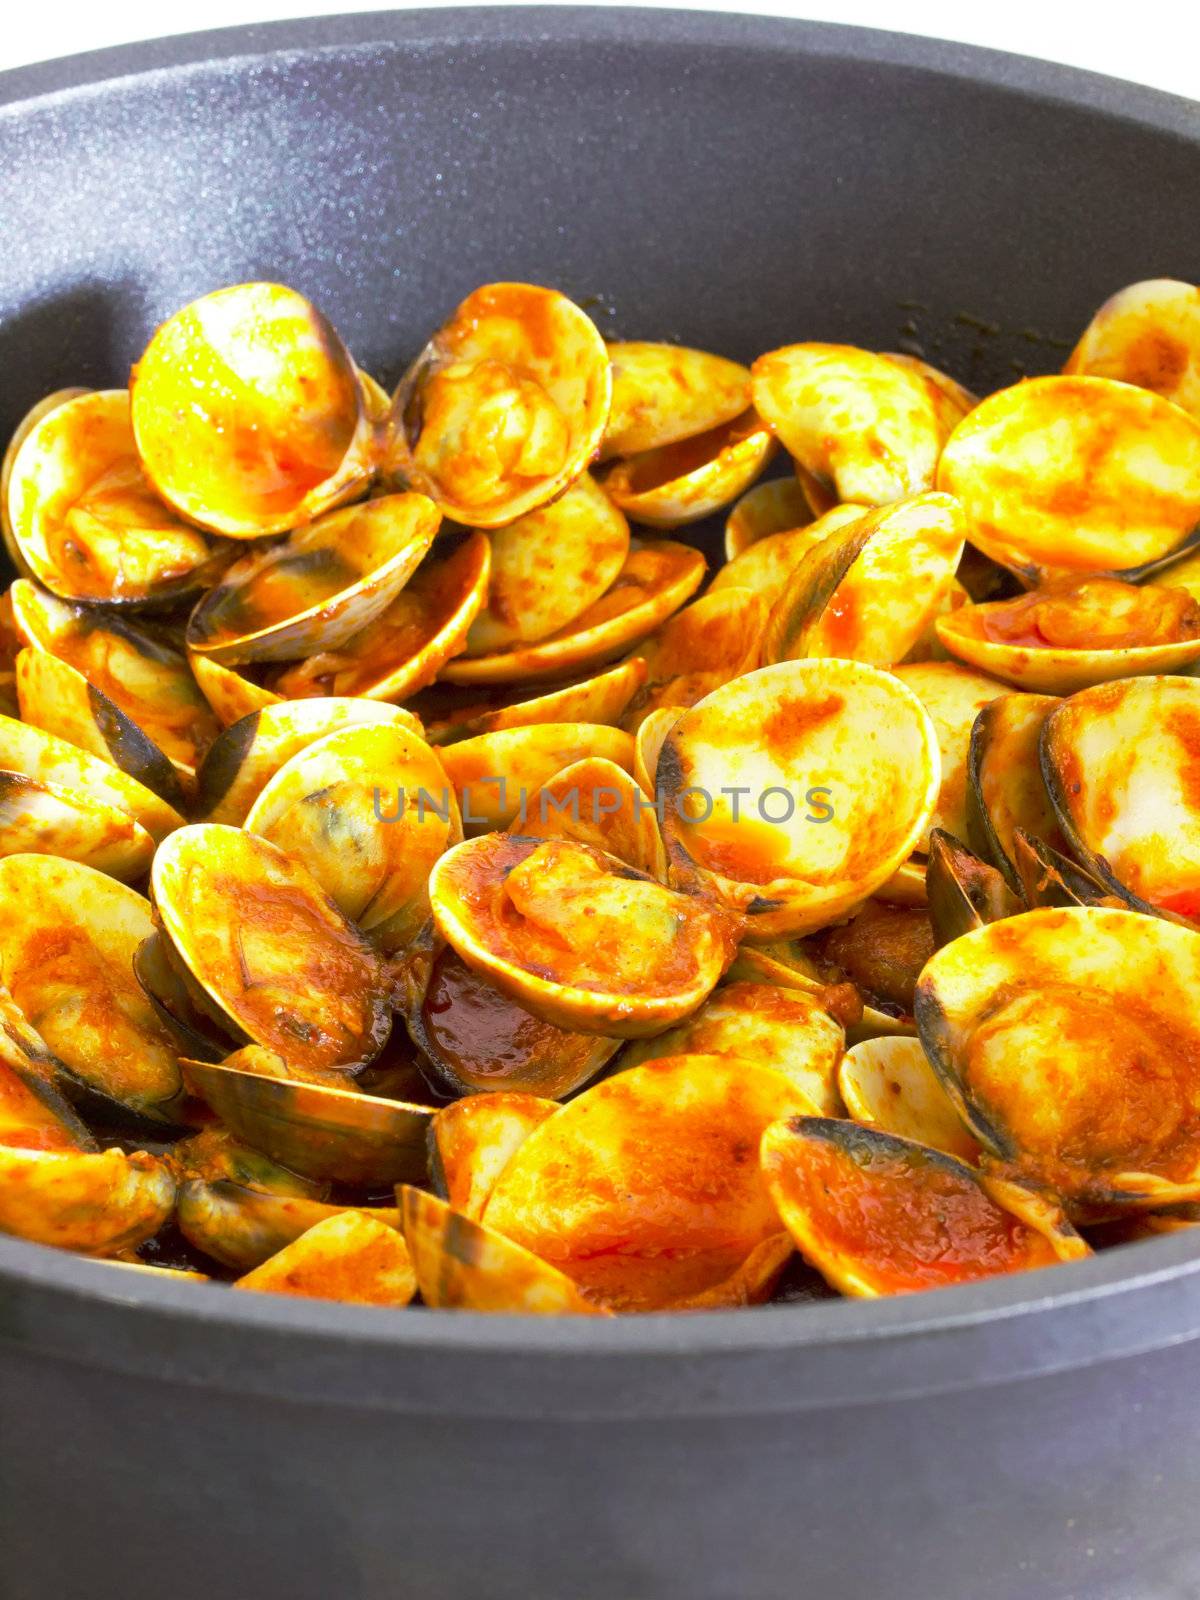 clams in chili sauce by zkruger